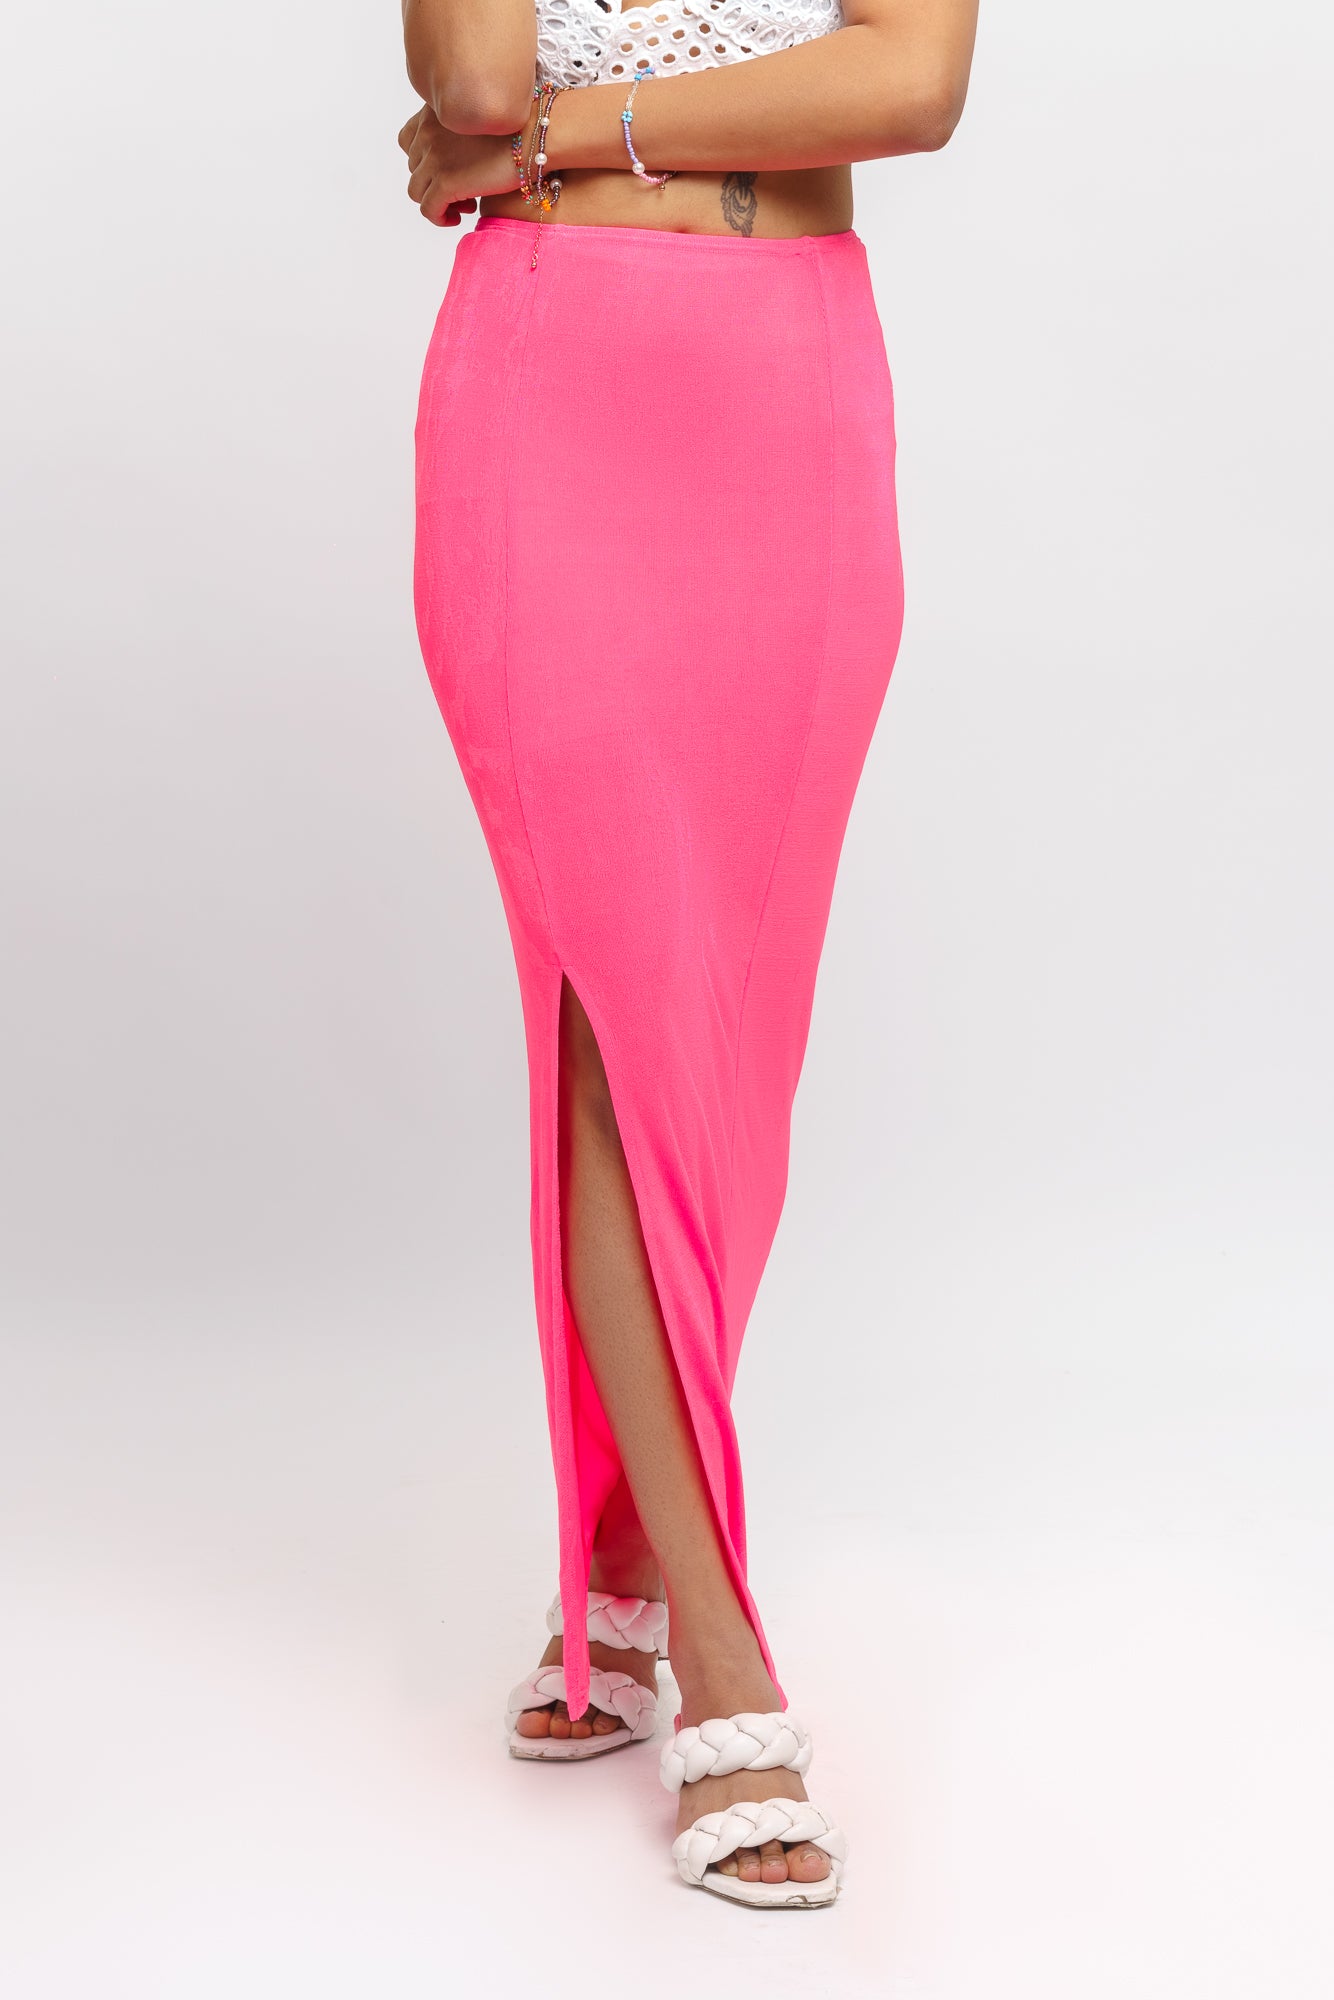 BRIGHT PINK FITTED SKIRT